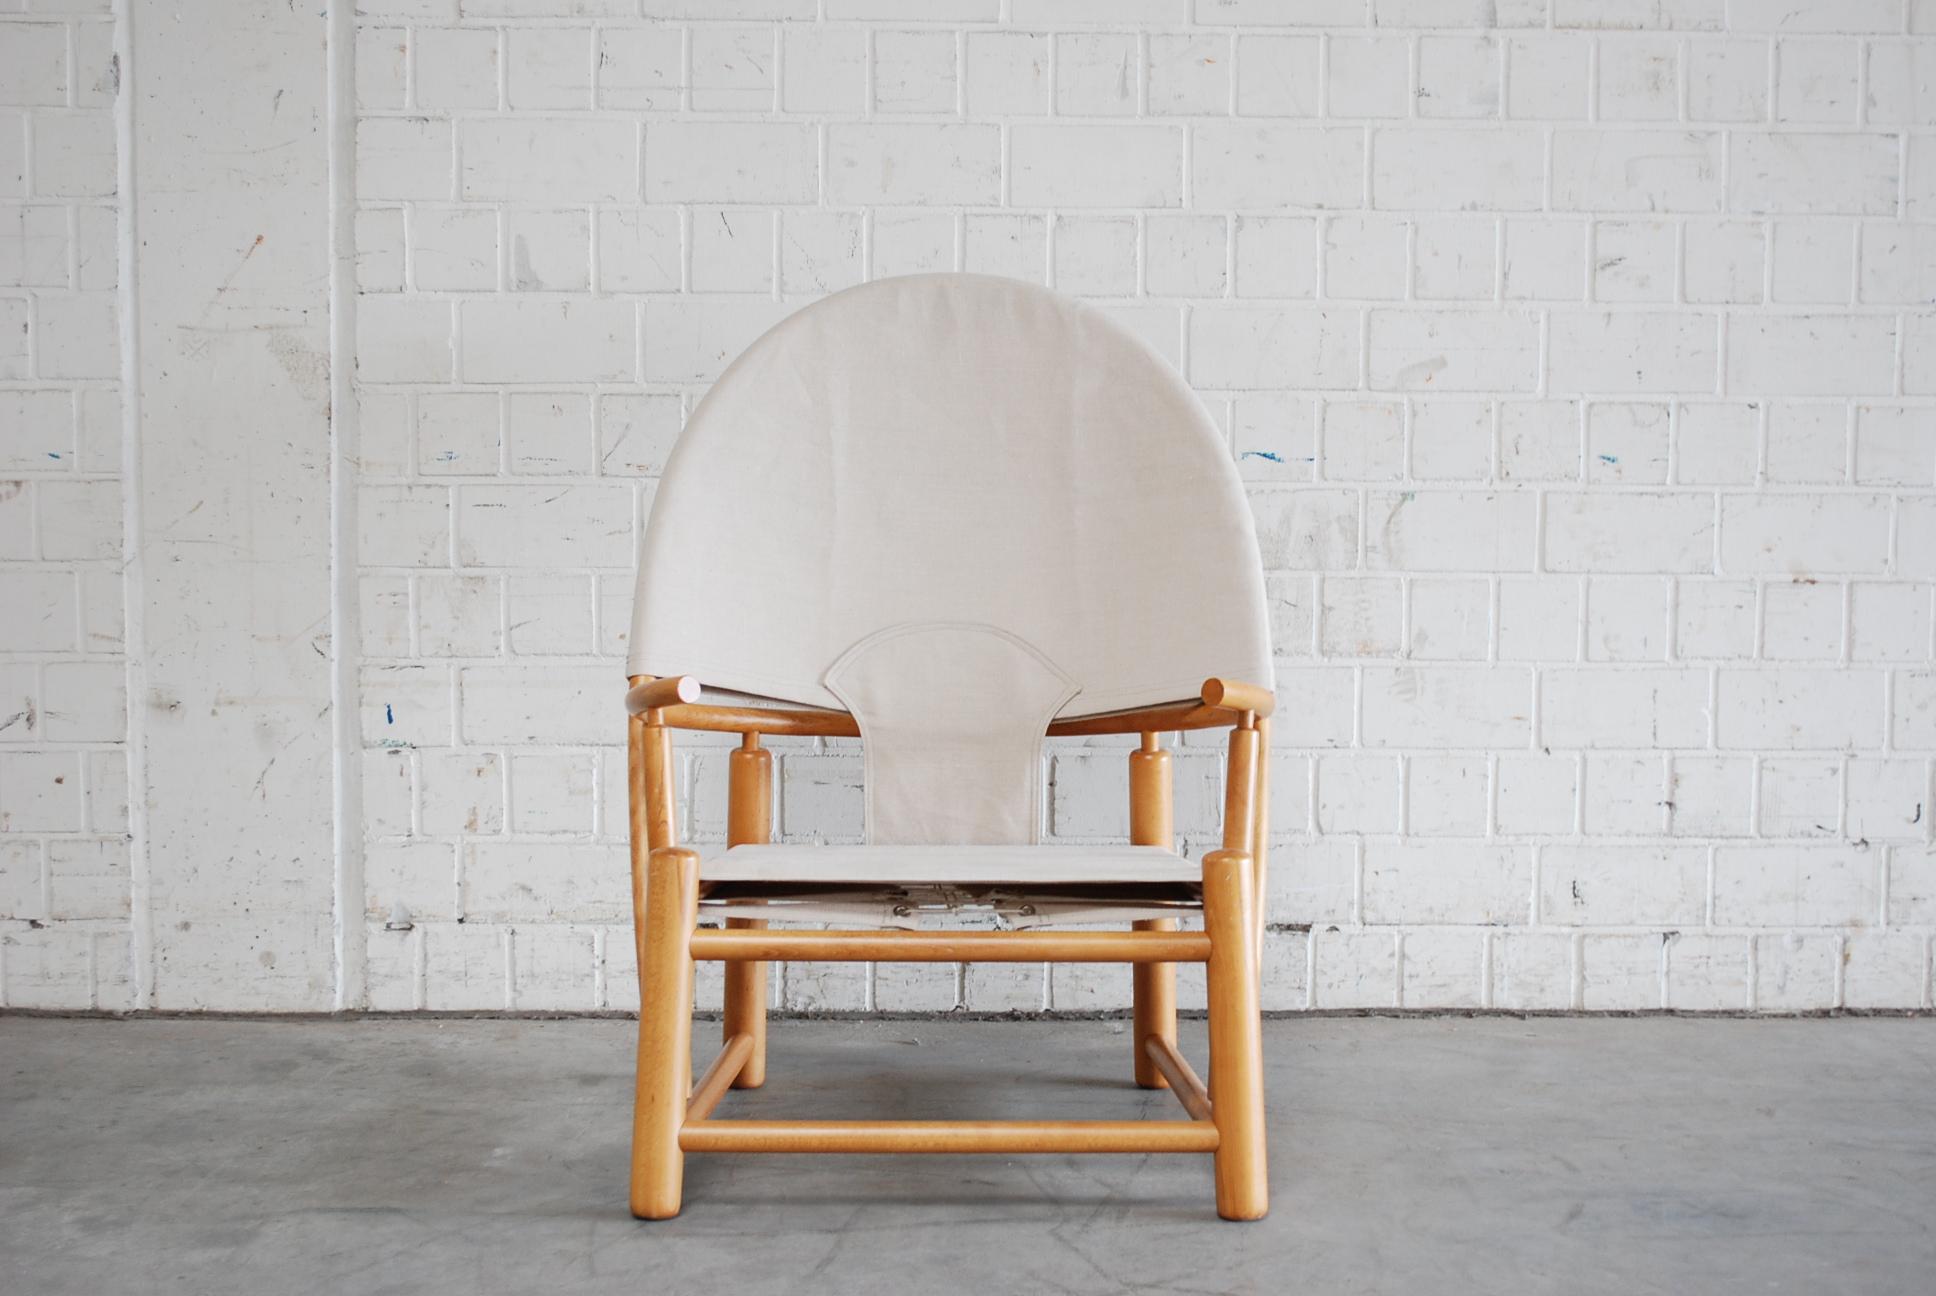 This hoop lounge chair was designed by Piero Palange and Werther Toffoloni for Germa.
The beech and canvas piece remains a Classic piece of Italian bentwood design.